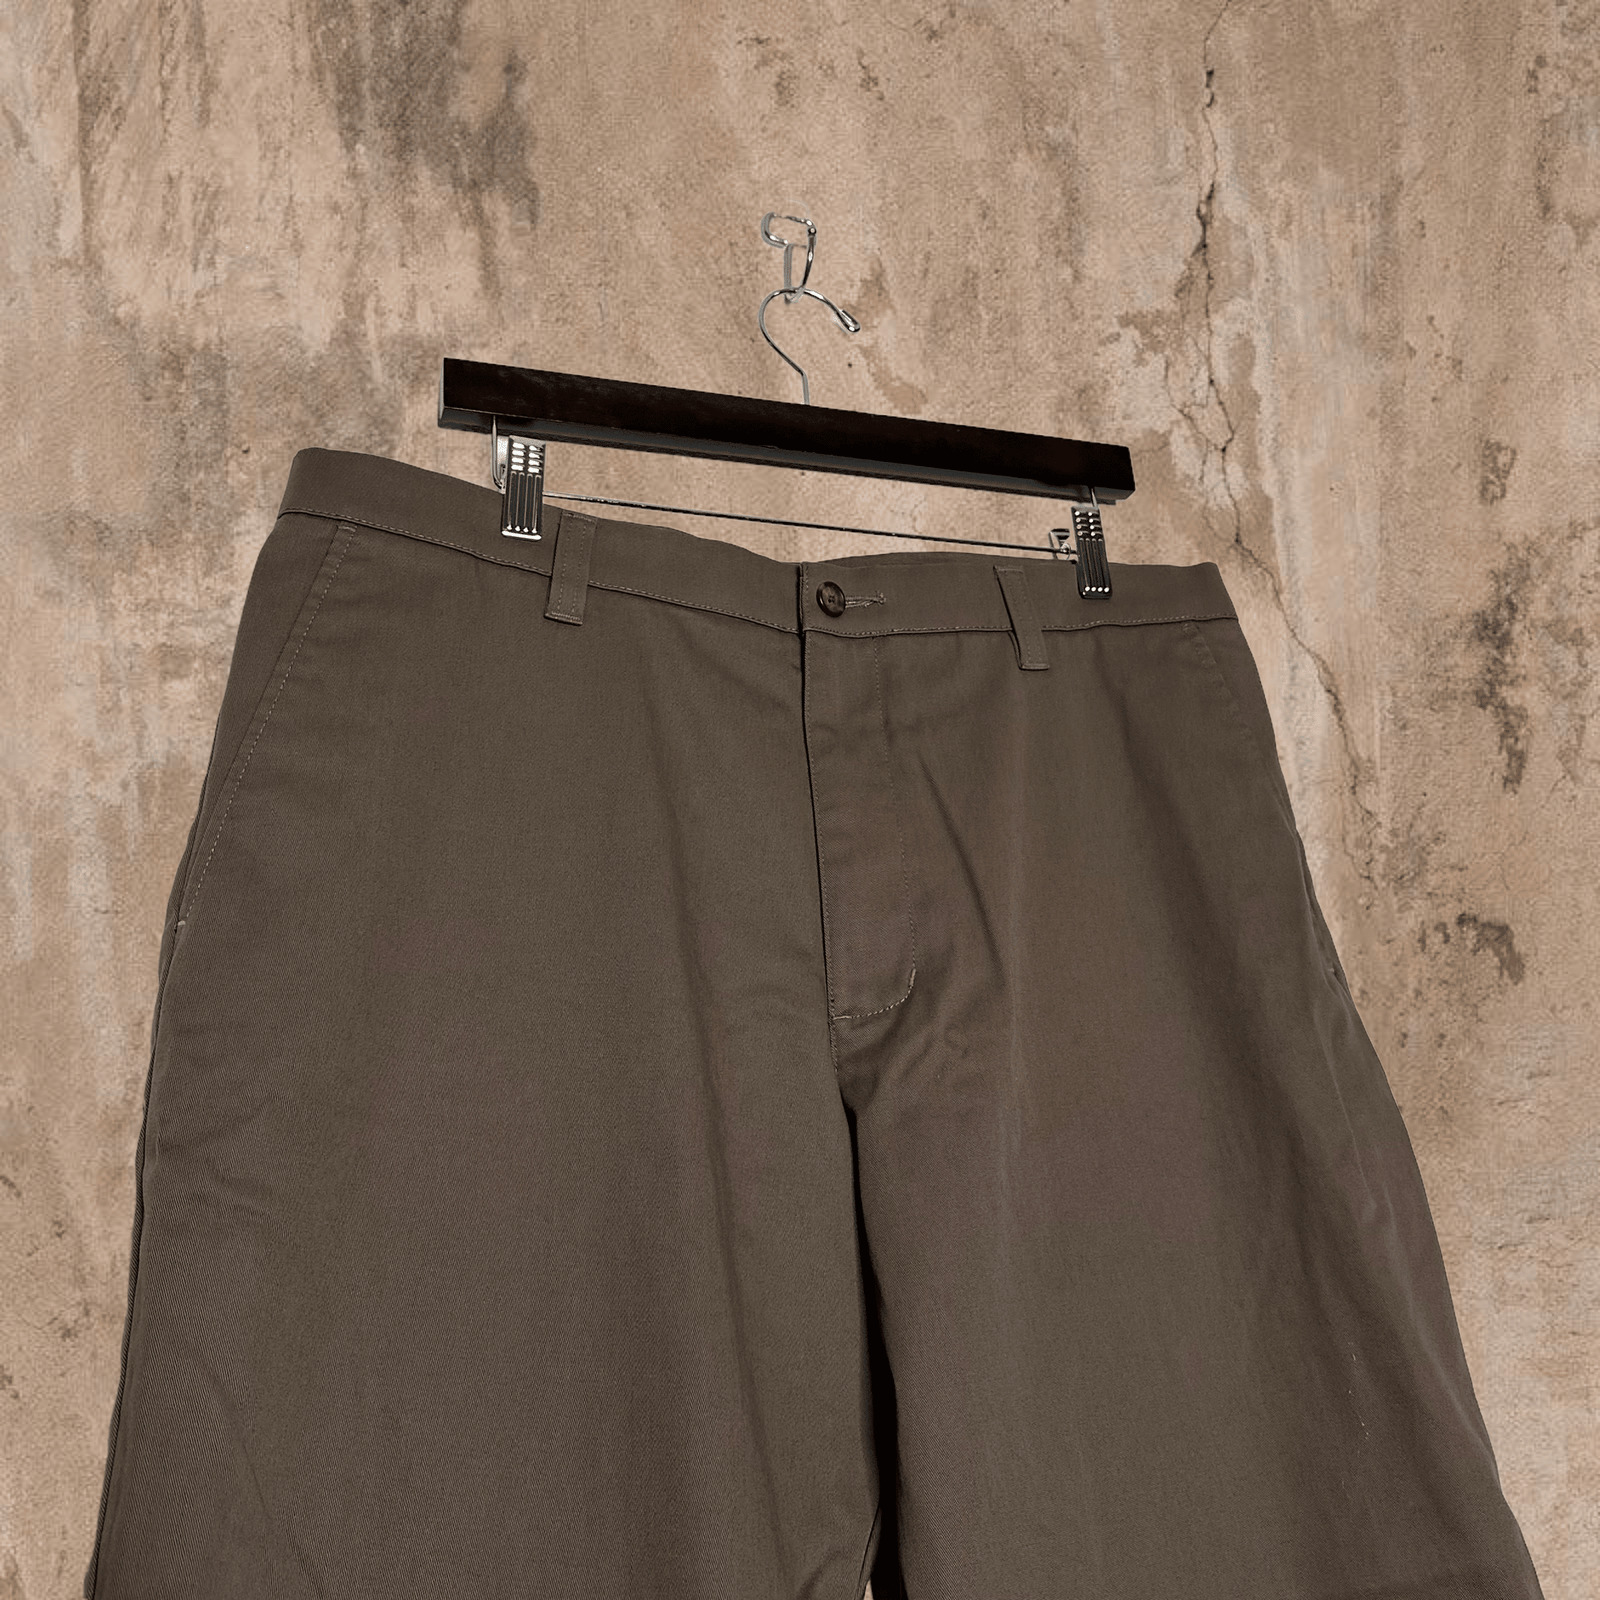 Chocolate Brown Khakis Pants 36x26 Baggy Fit Cher… - image 4